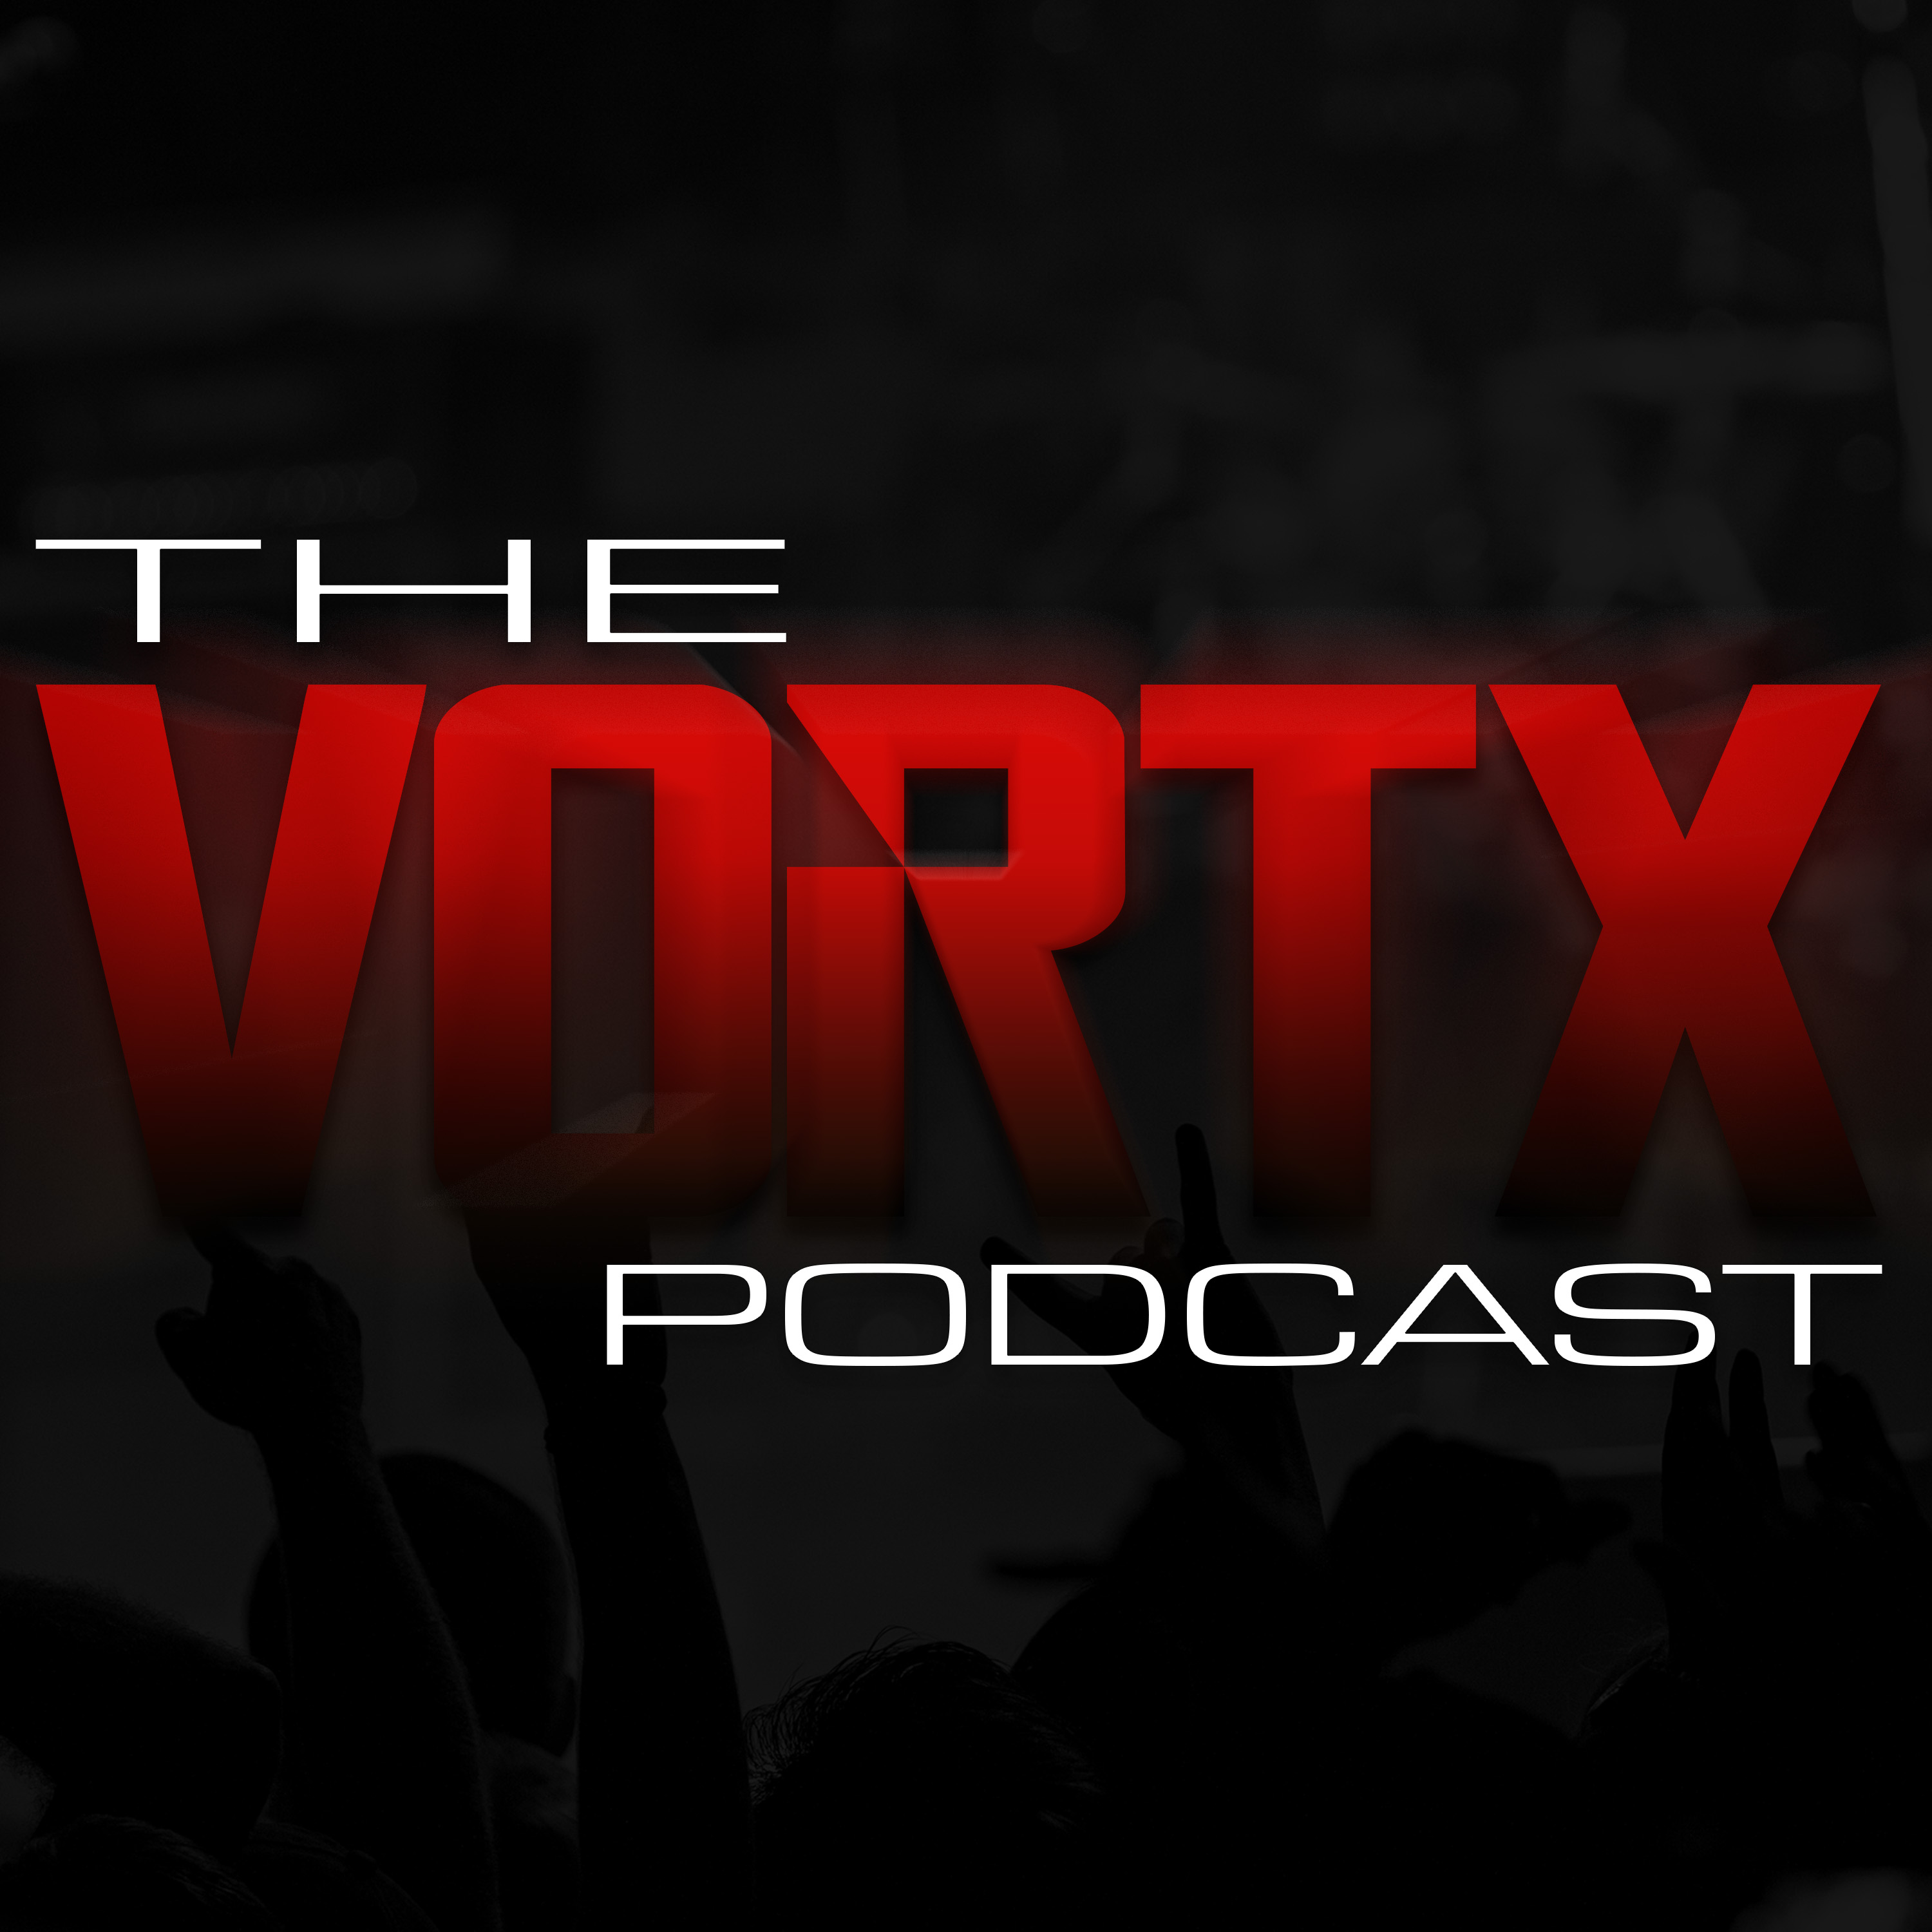 The Vortx Podcast